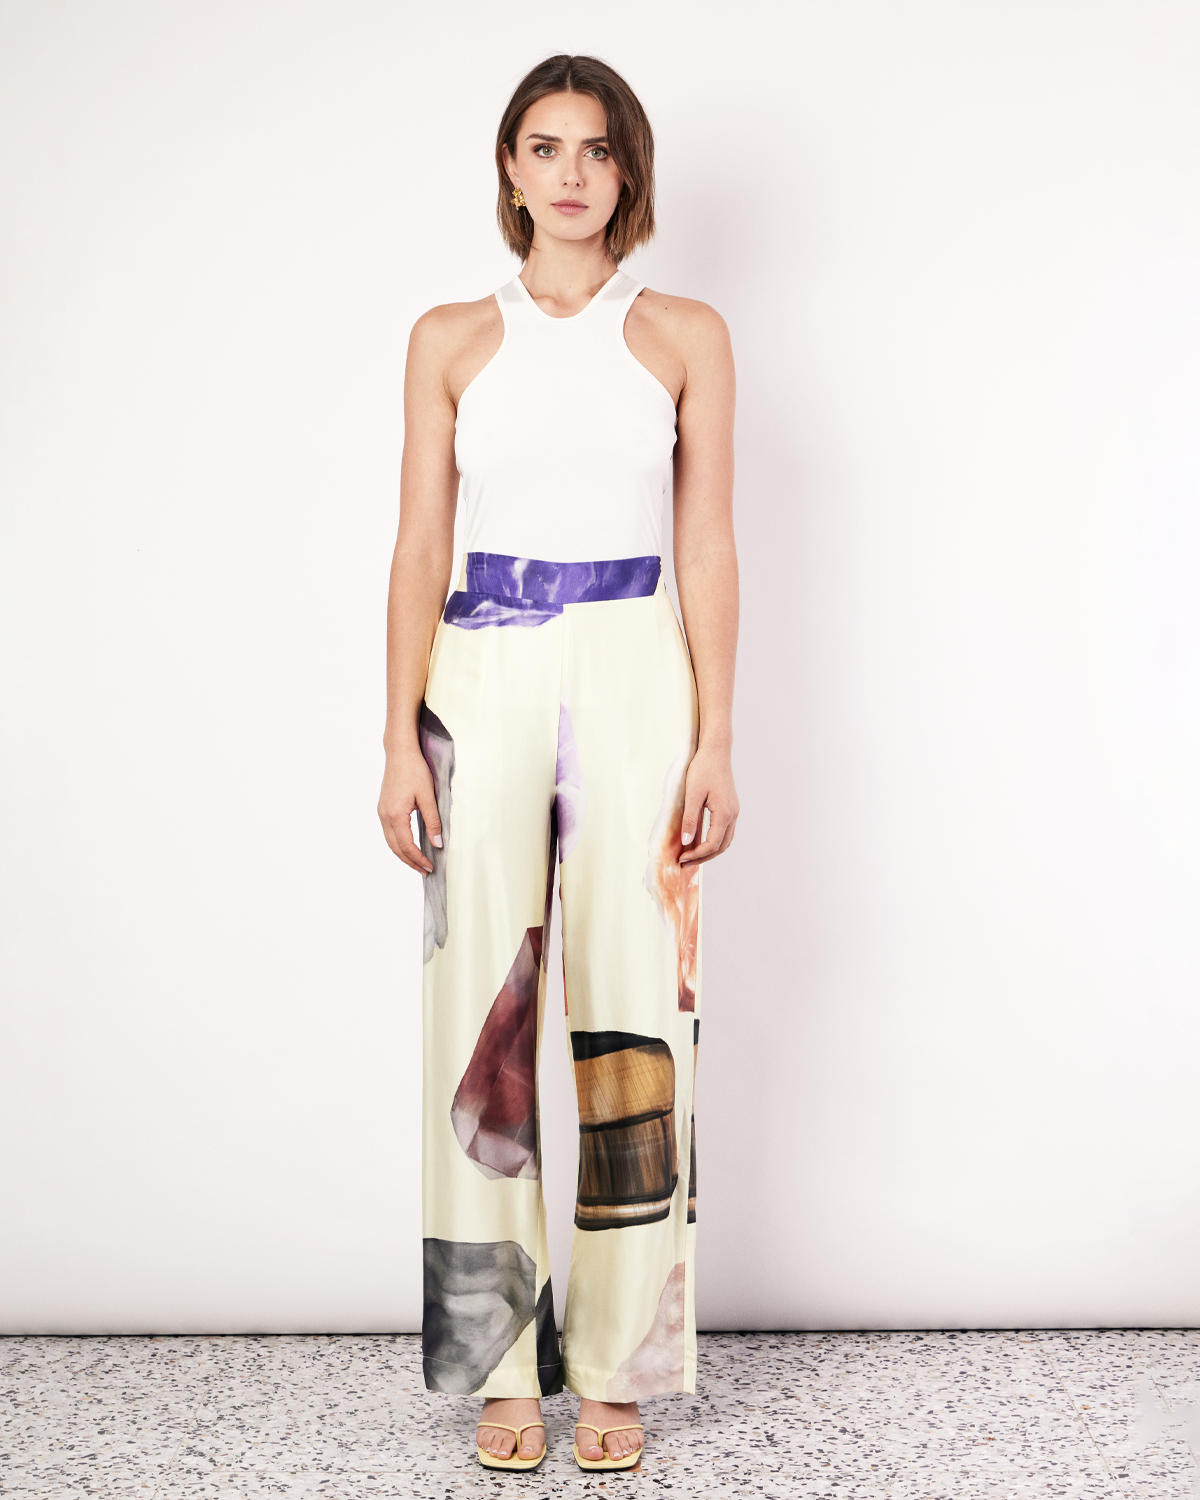 The Gemstone Pant features an updated waistband design that includes a flat band at the front and elastic at the back to flatter the figure. It features side pockets in our signature relaxed straight-leg pant silhouette, offering an elevated yet comfortable style. It is crafted from a silky recycled Oeko-Tex® certified viscose in the Gemstone Print, designed exclusively for Romy. Now available at Romy. 